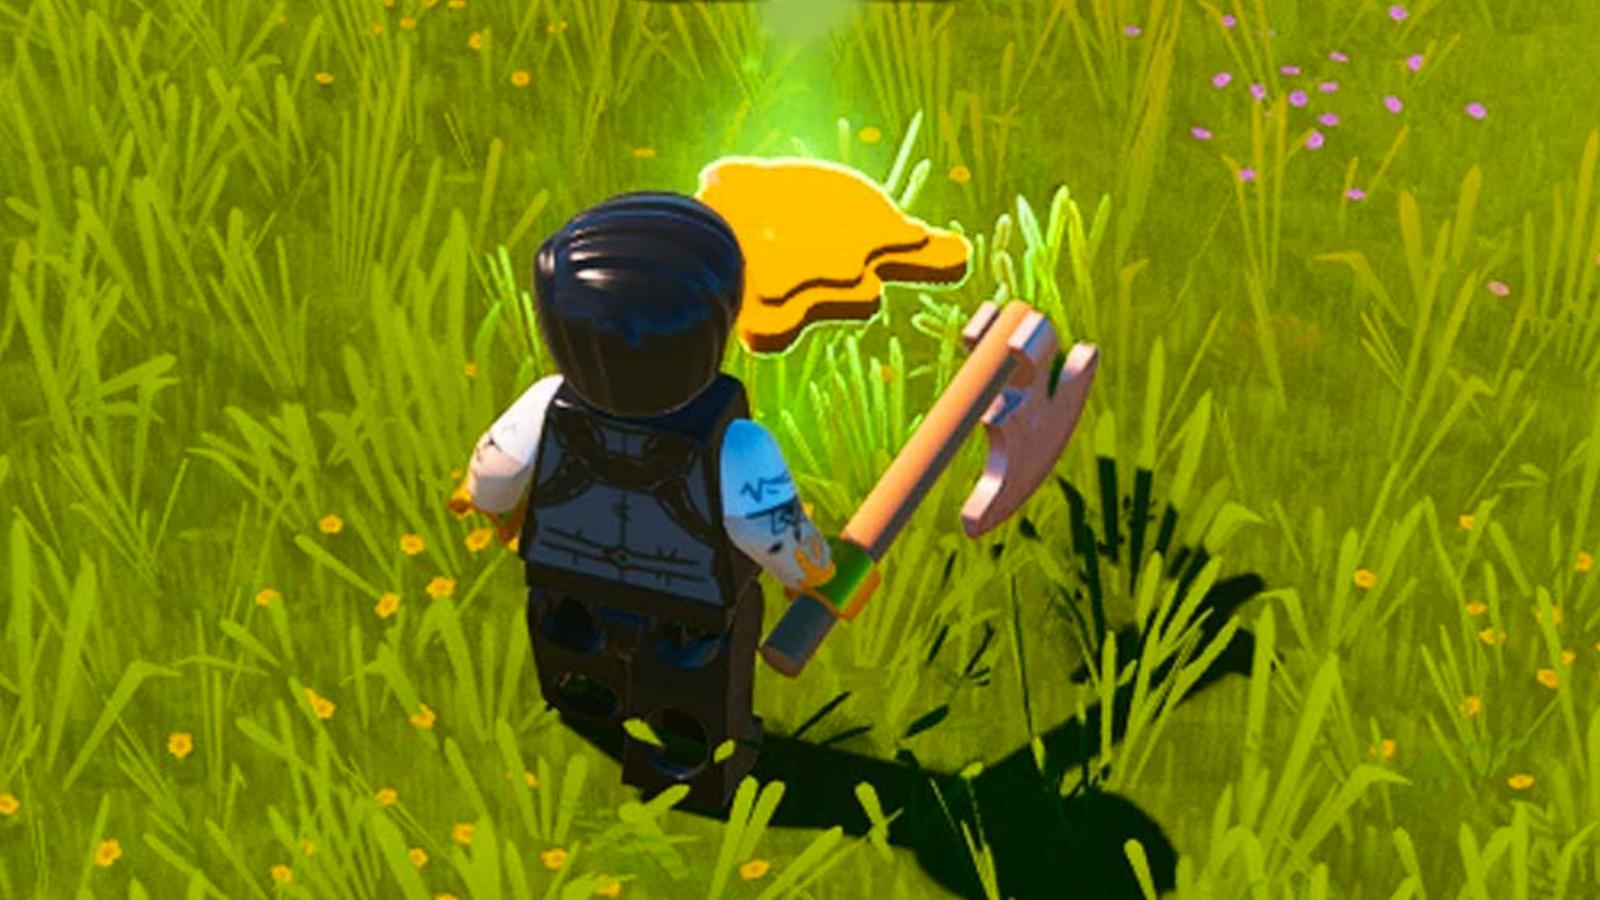 LEGO Fortnite Biomass item in the game.